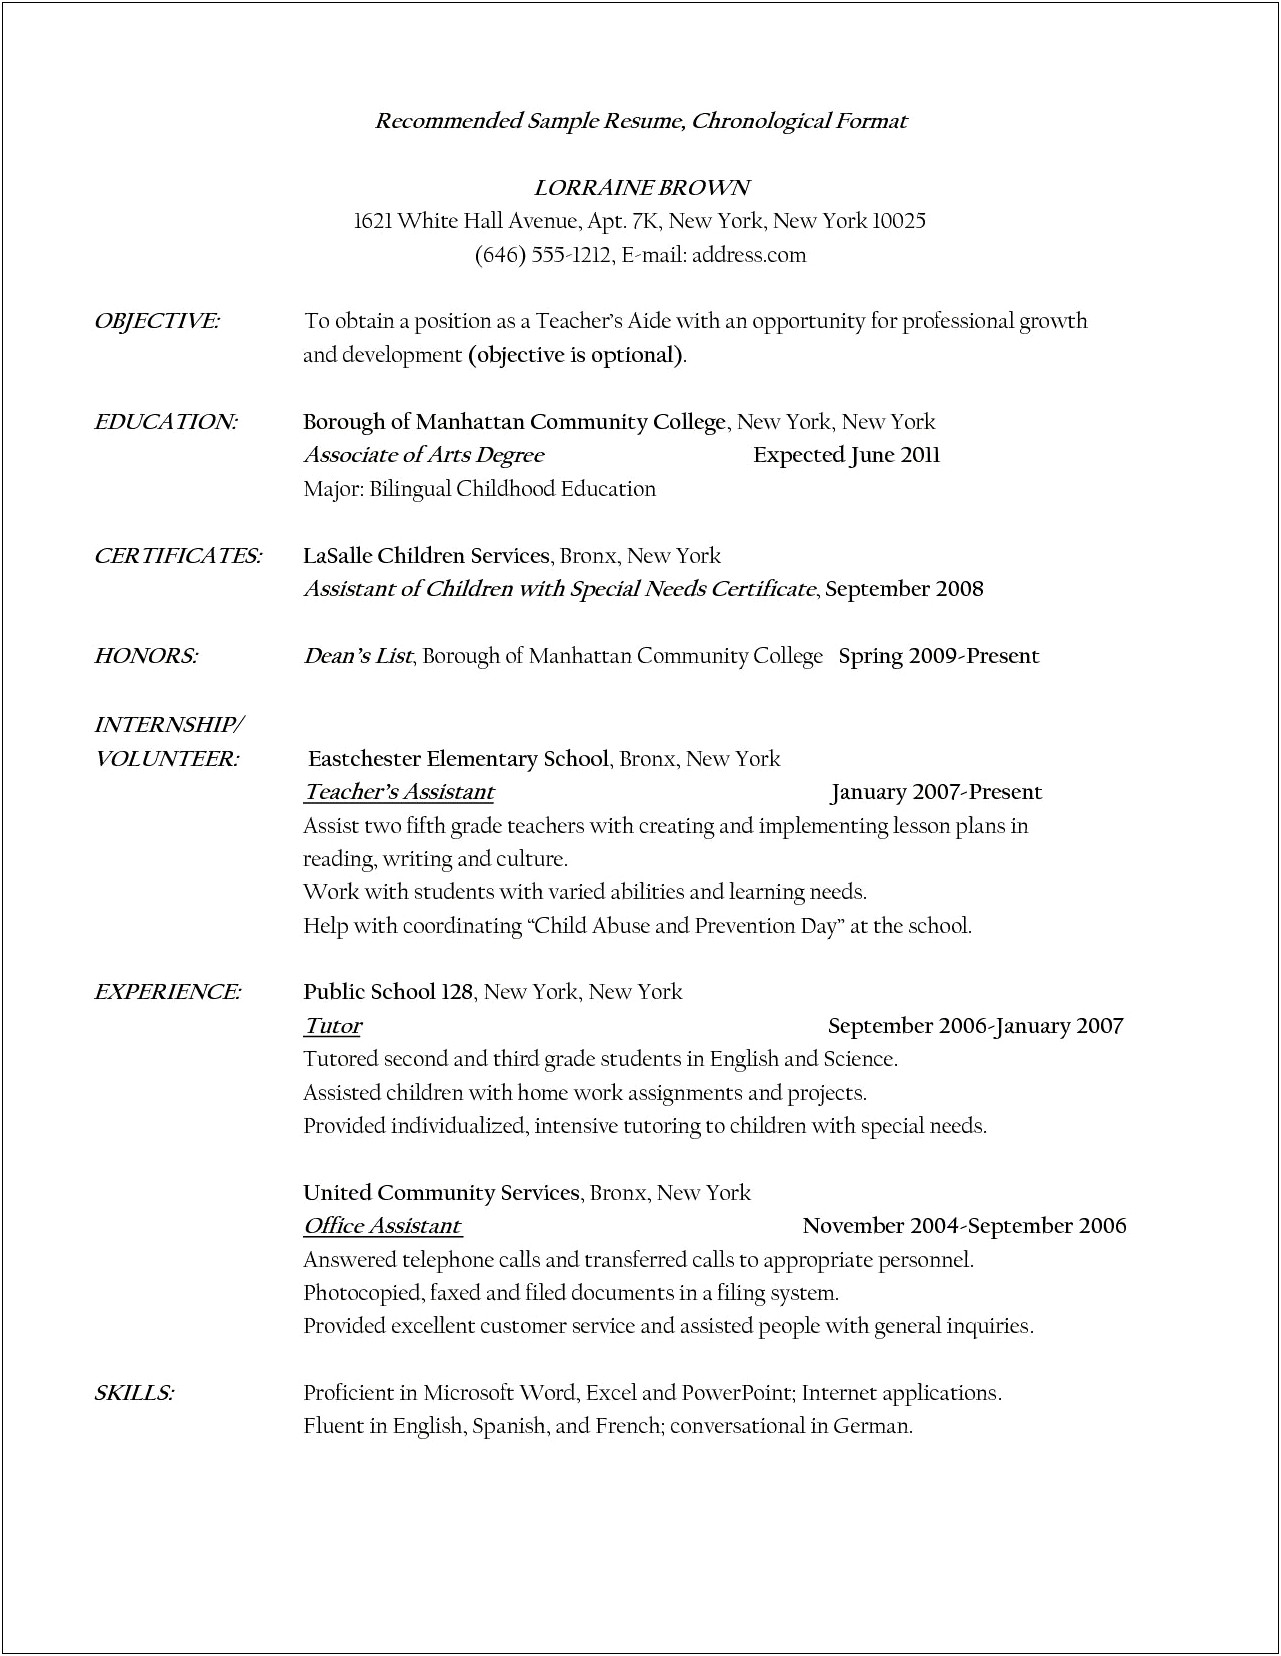 Resume Template For Teacher Assistant Position